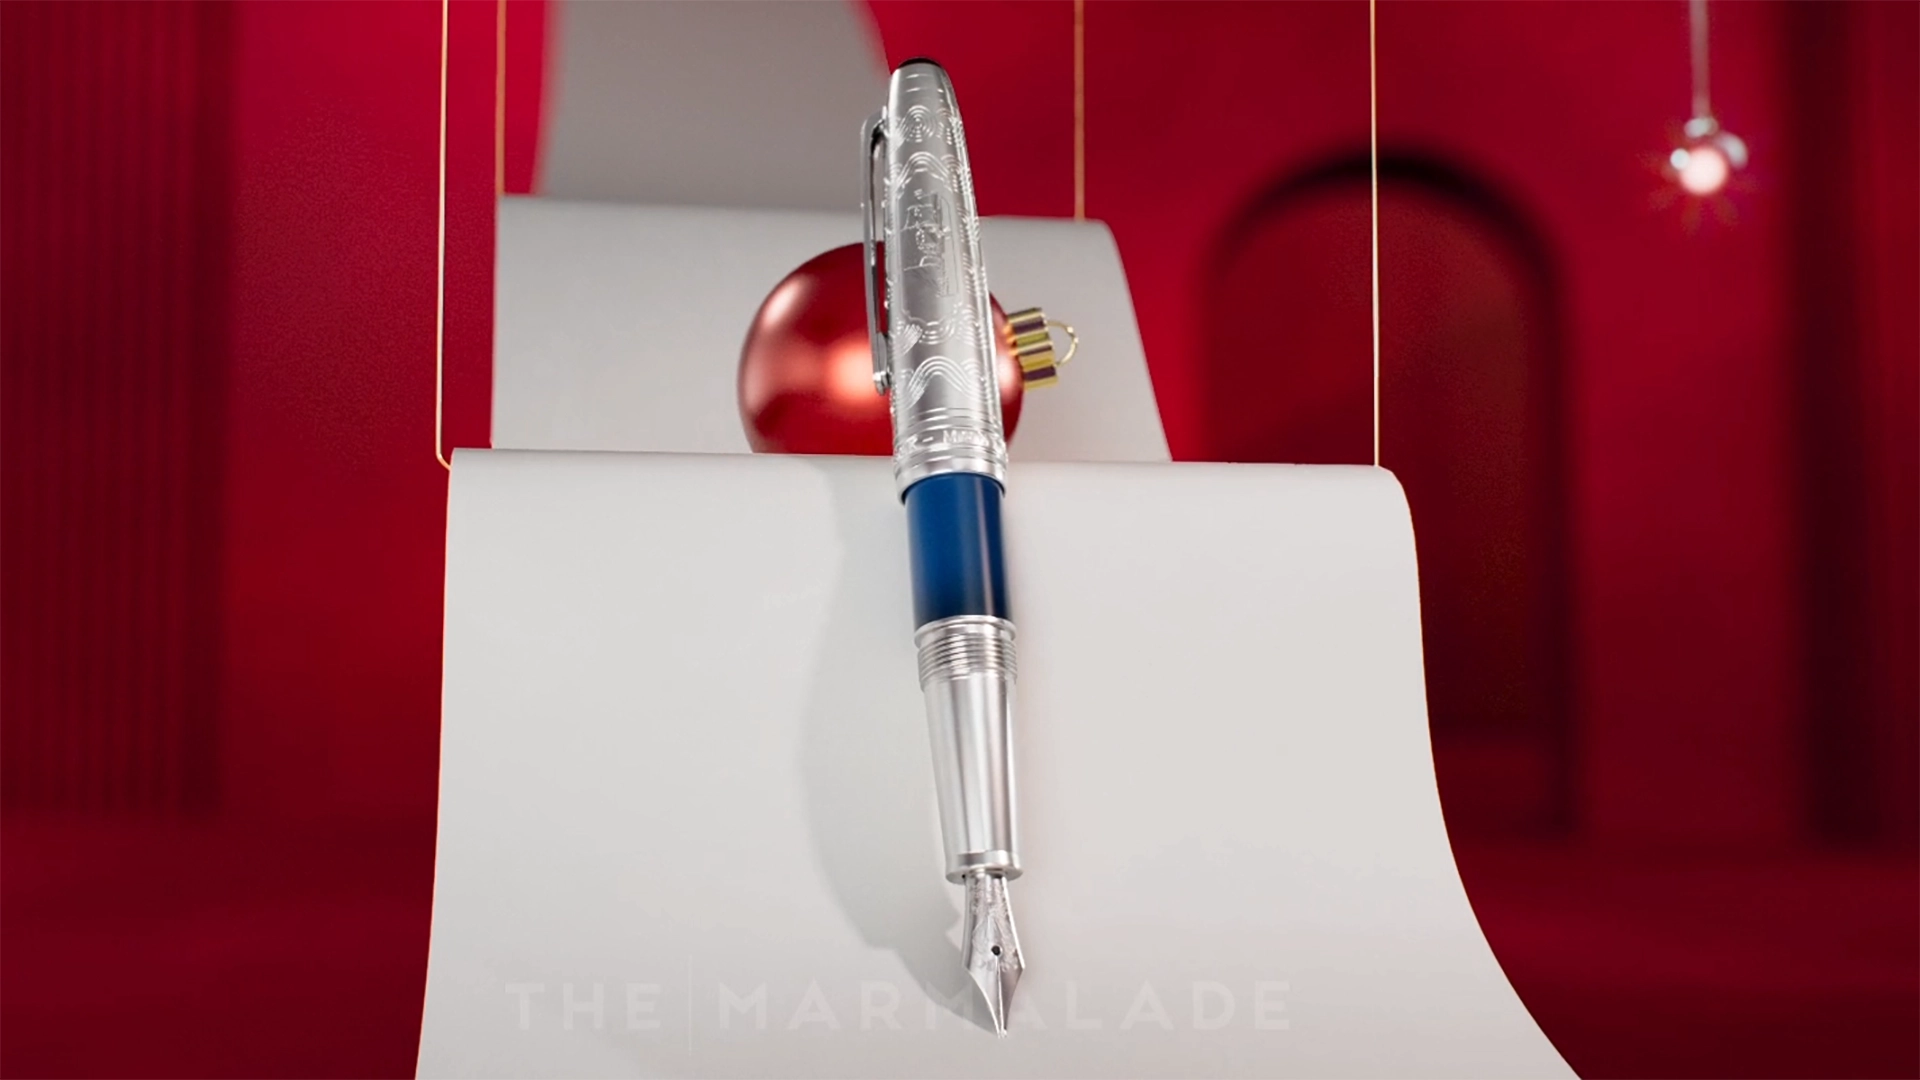  Client: Montblanc;
            Project: Happy Holidays 2021;
            Concept+Direction: Demo Demo;
            Production + Post: The Marmalade;
            Audio: The Marmalade;
            
      
          For the Montblanc Happy Holidays project, my responsibilities ranged from managing CAD data and engaging in modeling and shading, 
          to lighting, 
          culminating in the joyful rendering of the visuals of the pen sequence Christmas-themed commercial.